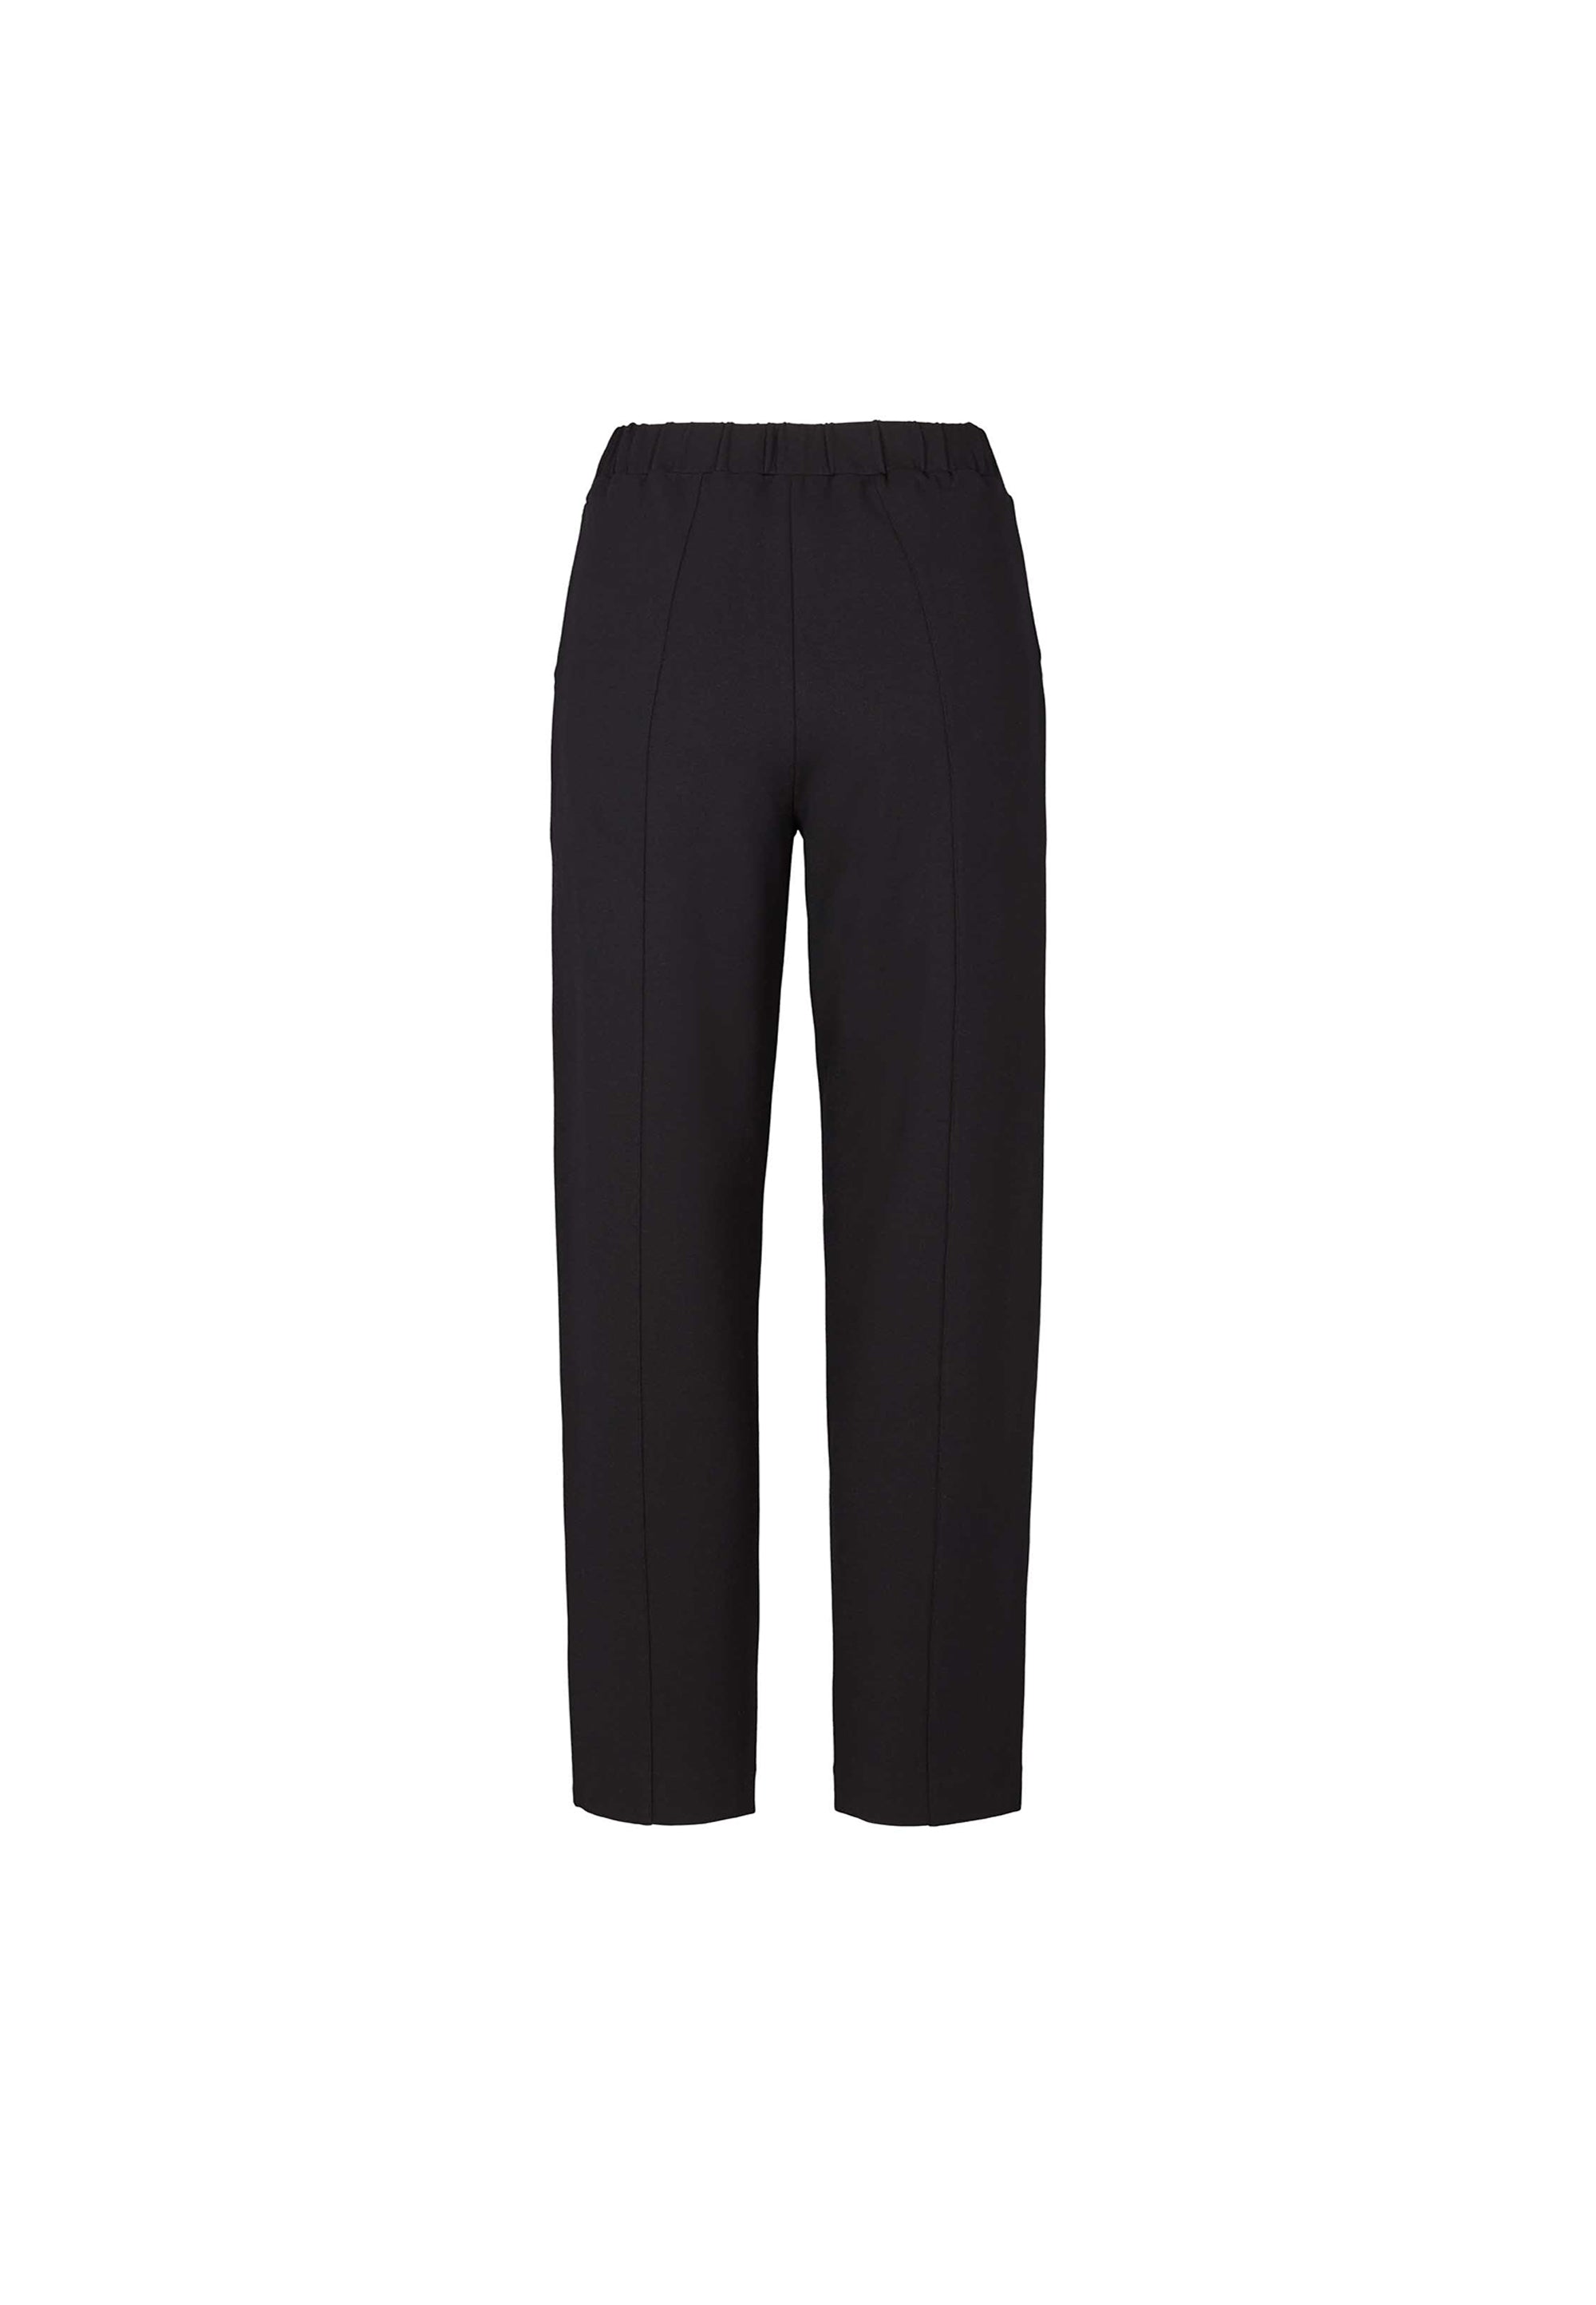 LAURIE  Diana Relaxed - Medium Length Trousers RELAXED 99147 Black